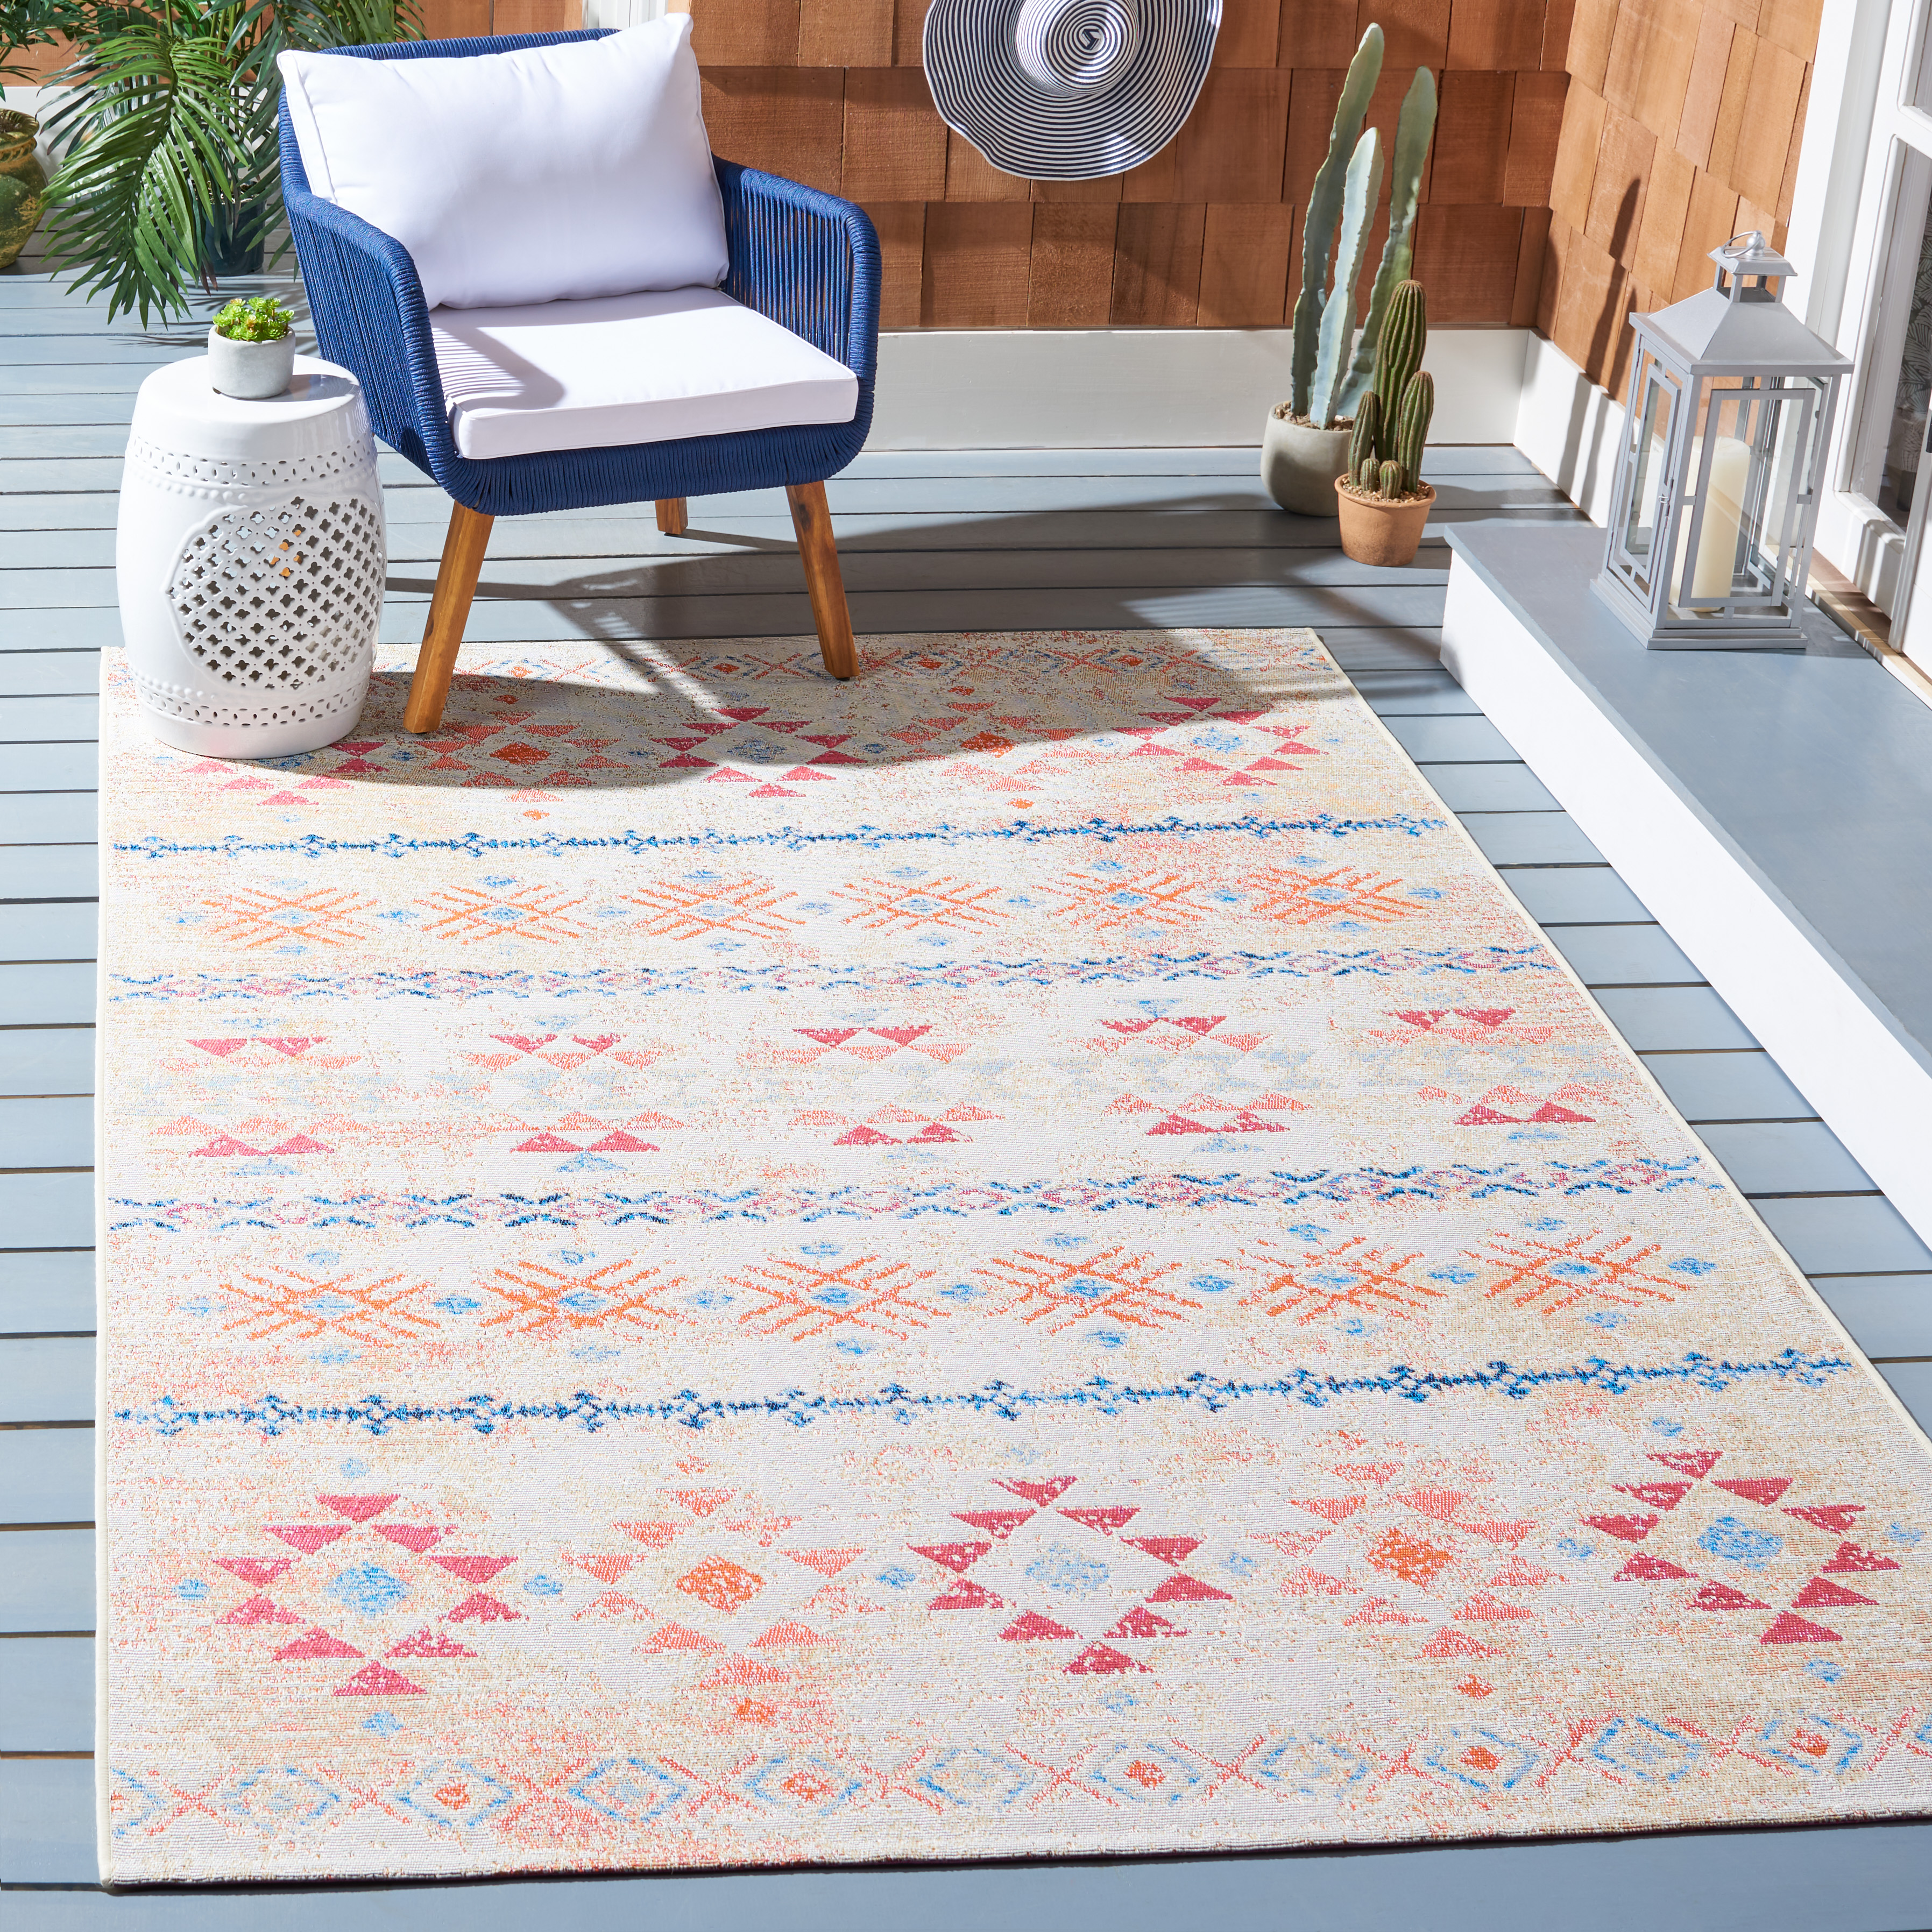 Safavieh Summer Donella Outdoor Boho Distressed Area Rug, Ivory/Red, 5'3" x 7'6" - image 1 of 6